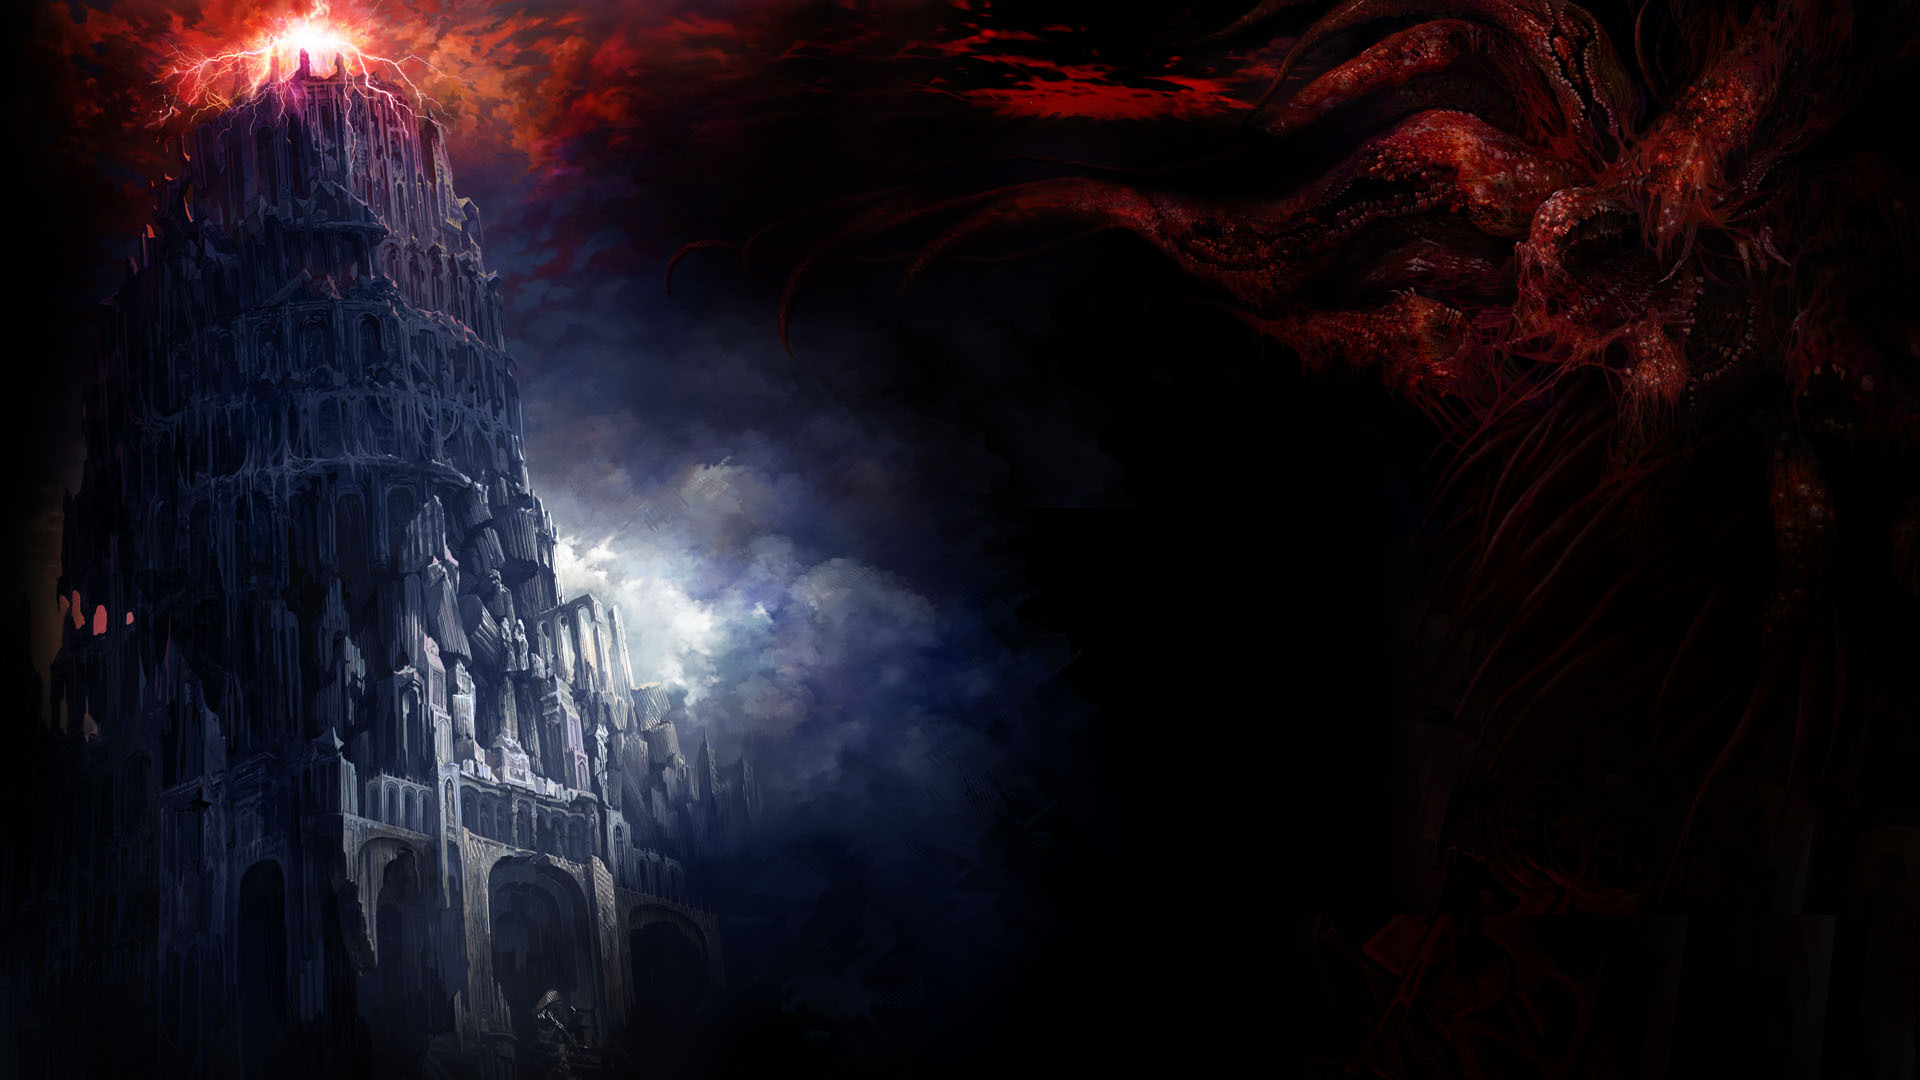 Video Game Path Of Exile HD Wallpaper | Background Image